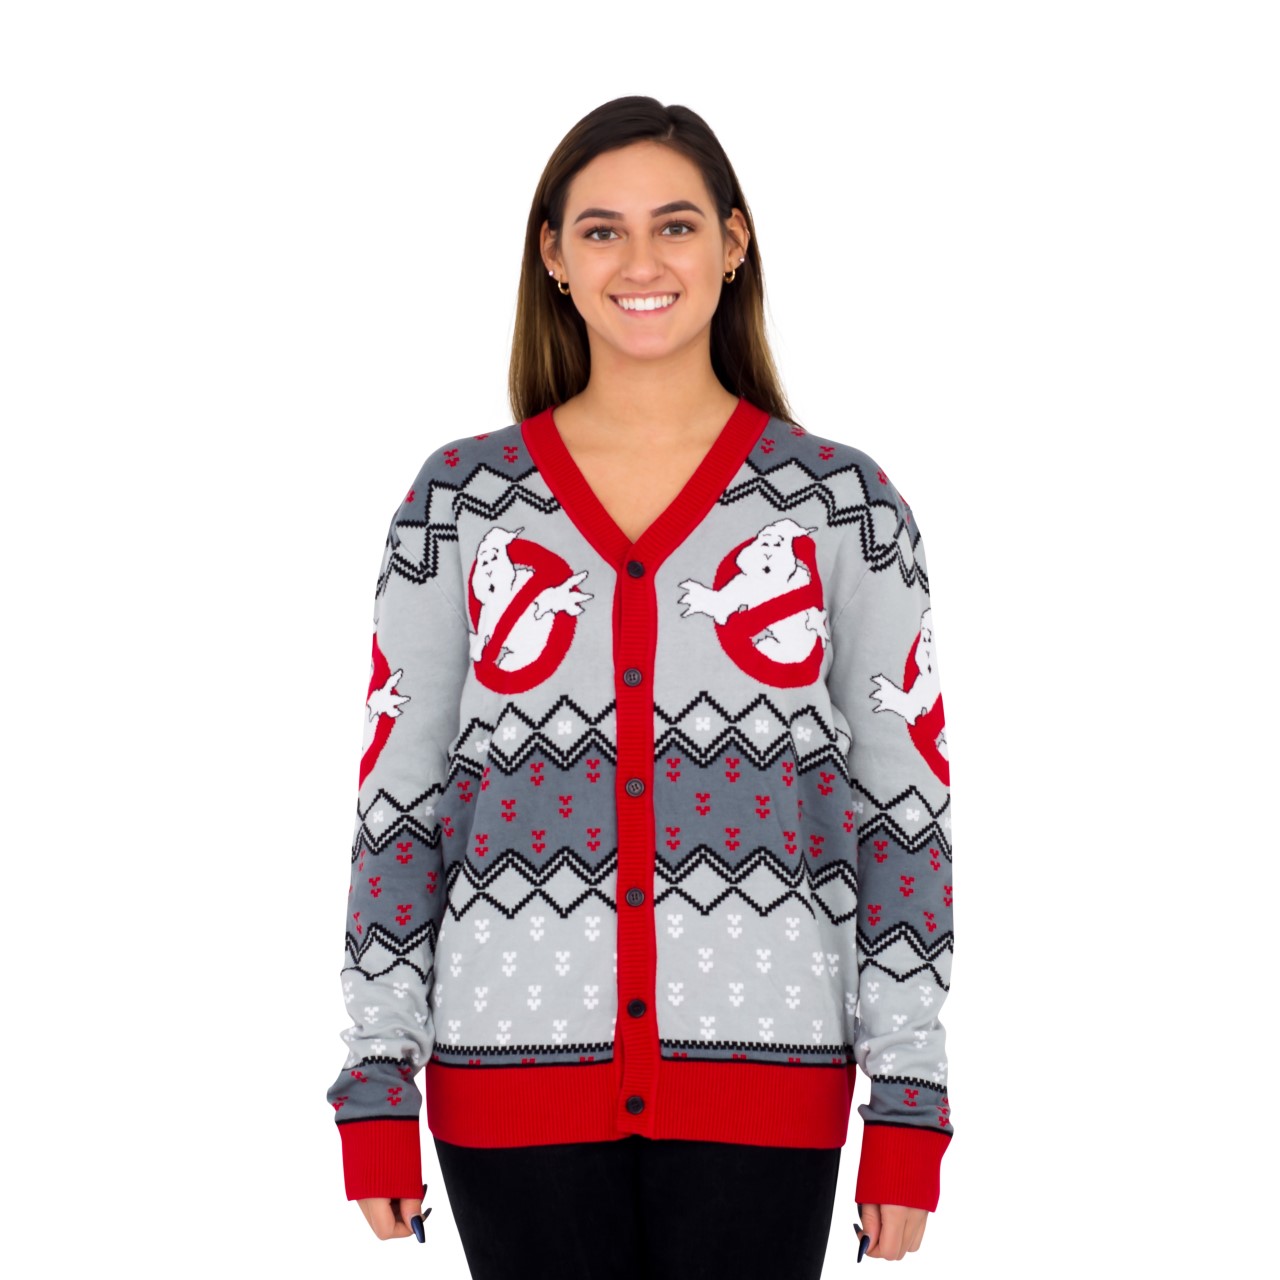 Women’s Ghostbusters Logo Ugly Christmas Cardigan Sweater,Ugly Christmas Sweaters | Funny Xmas Sweaters for Men and Women